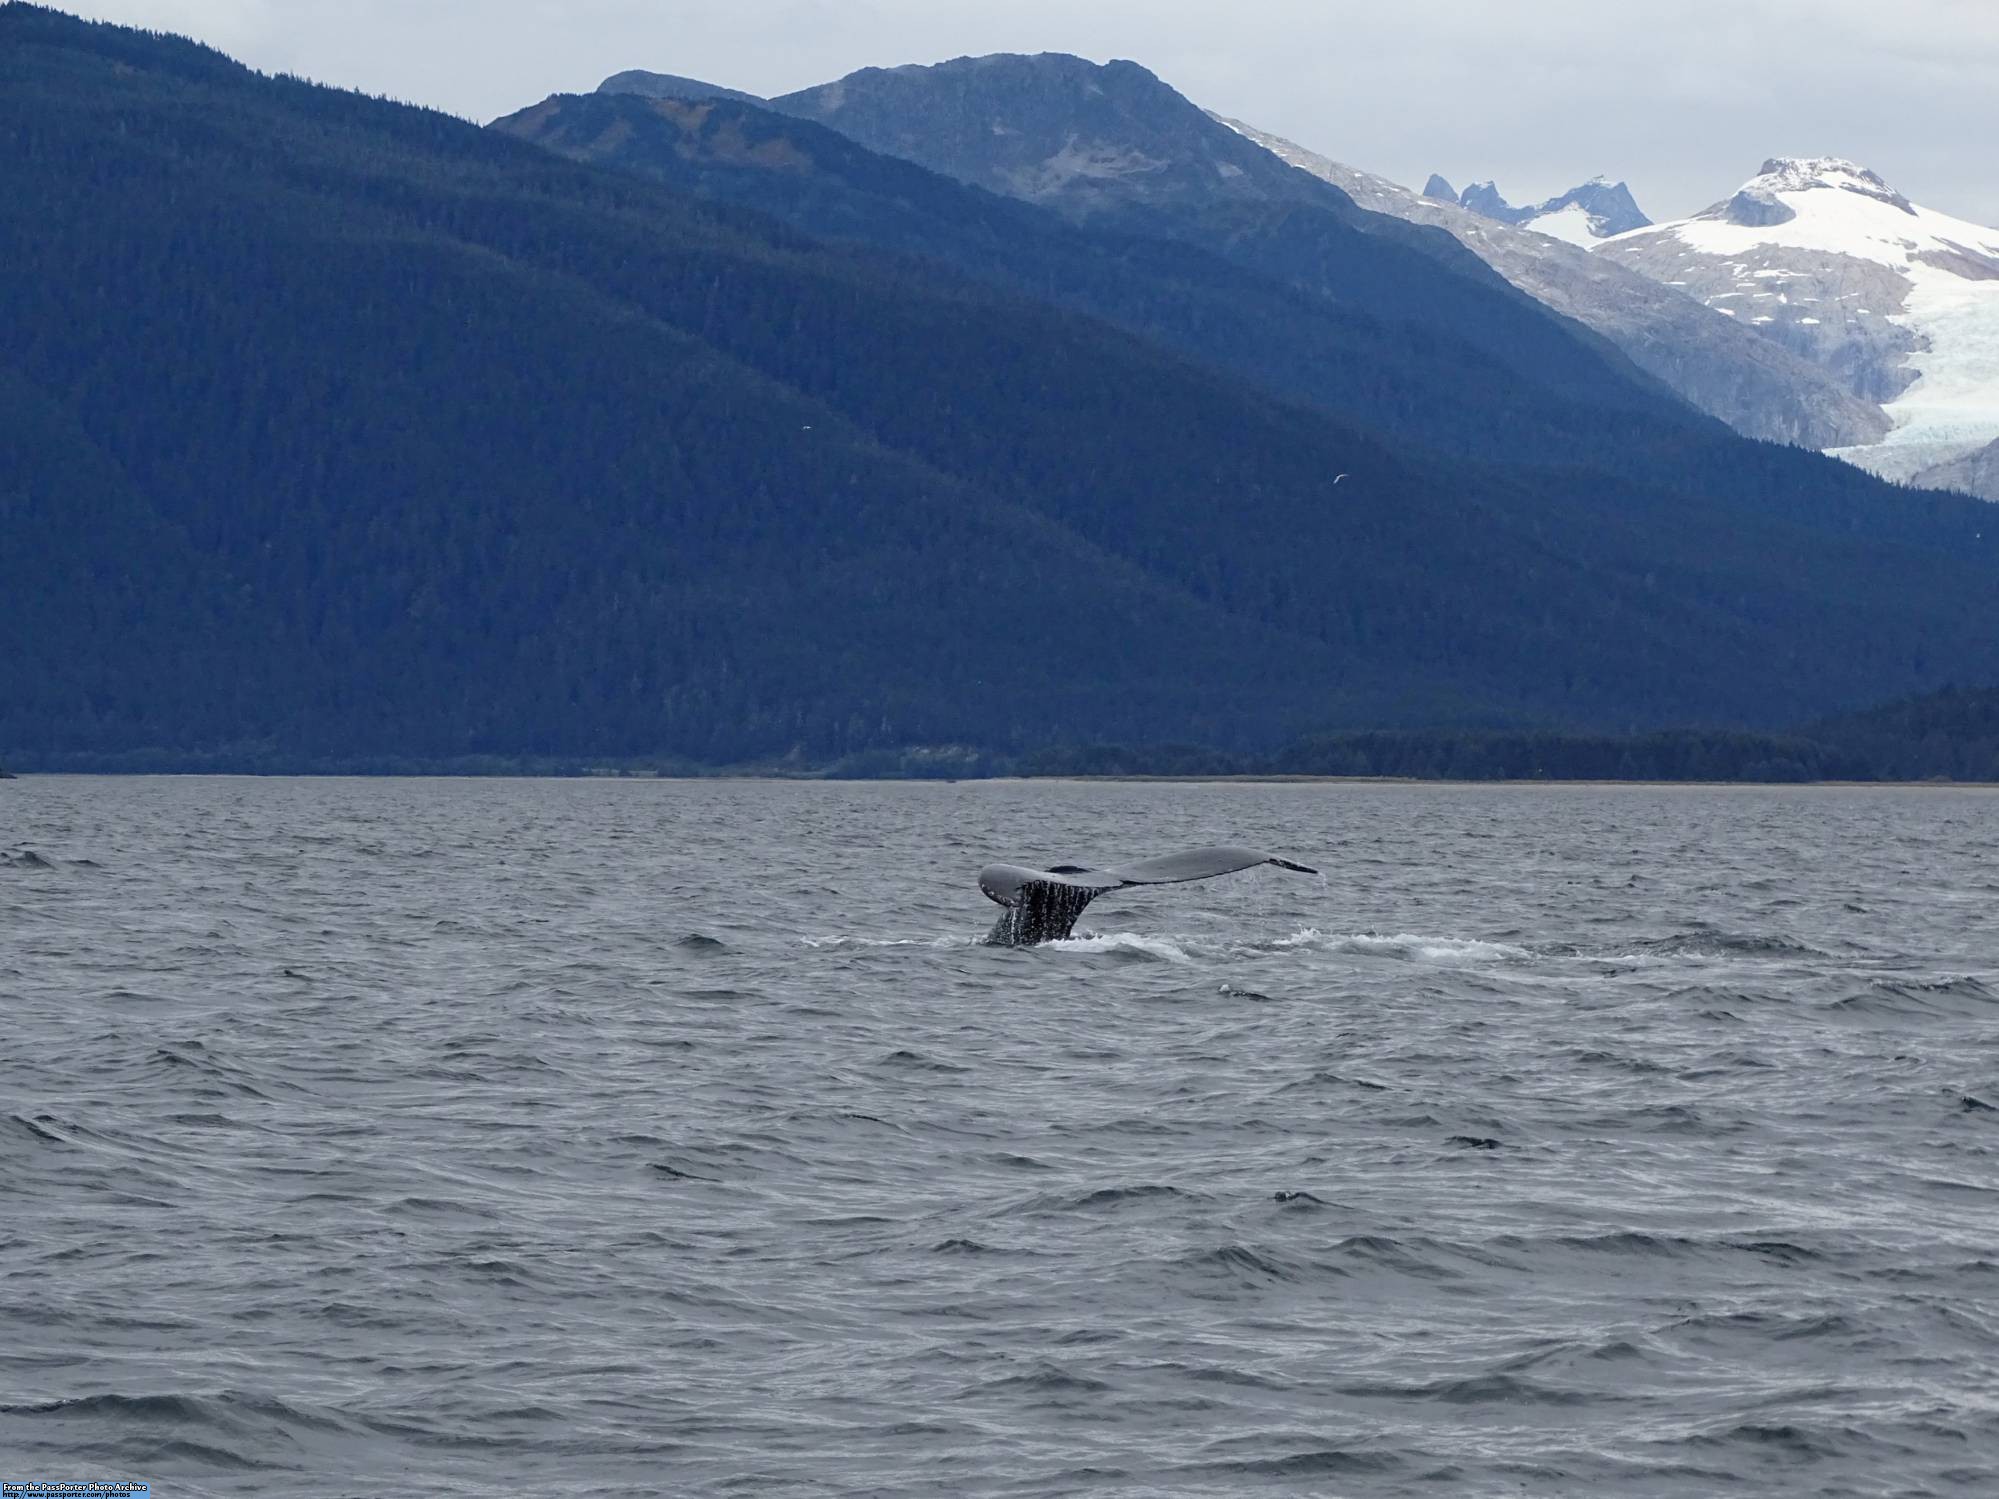 Enjoy the Whales and Glaciers Photo Safari in Juneau while on your Disney Cruise to Alaska | PassPorter.com